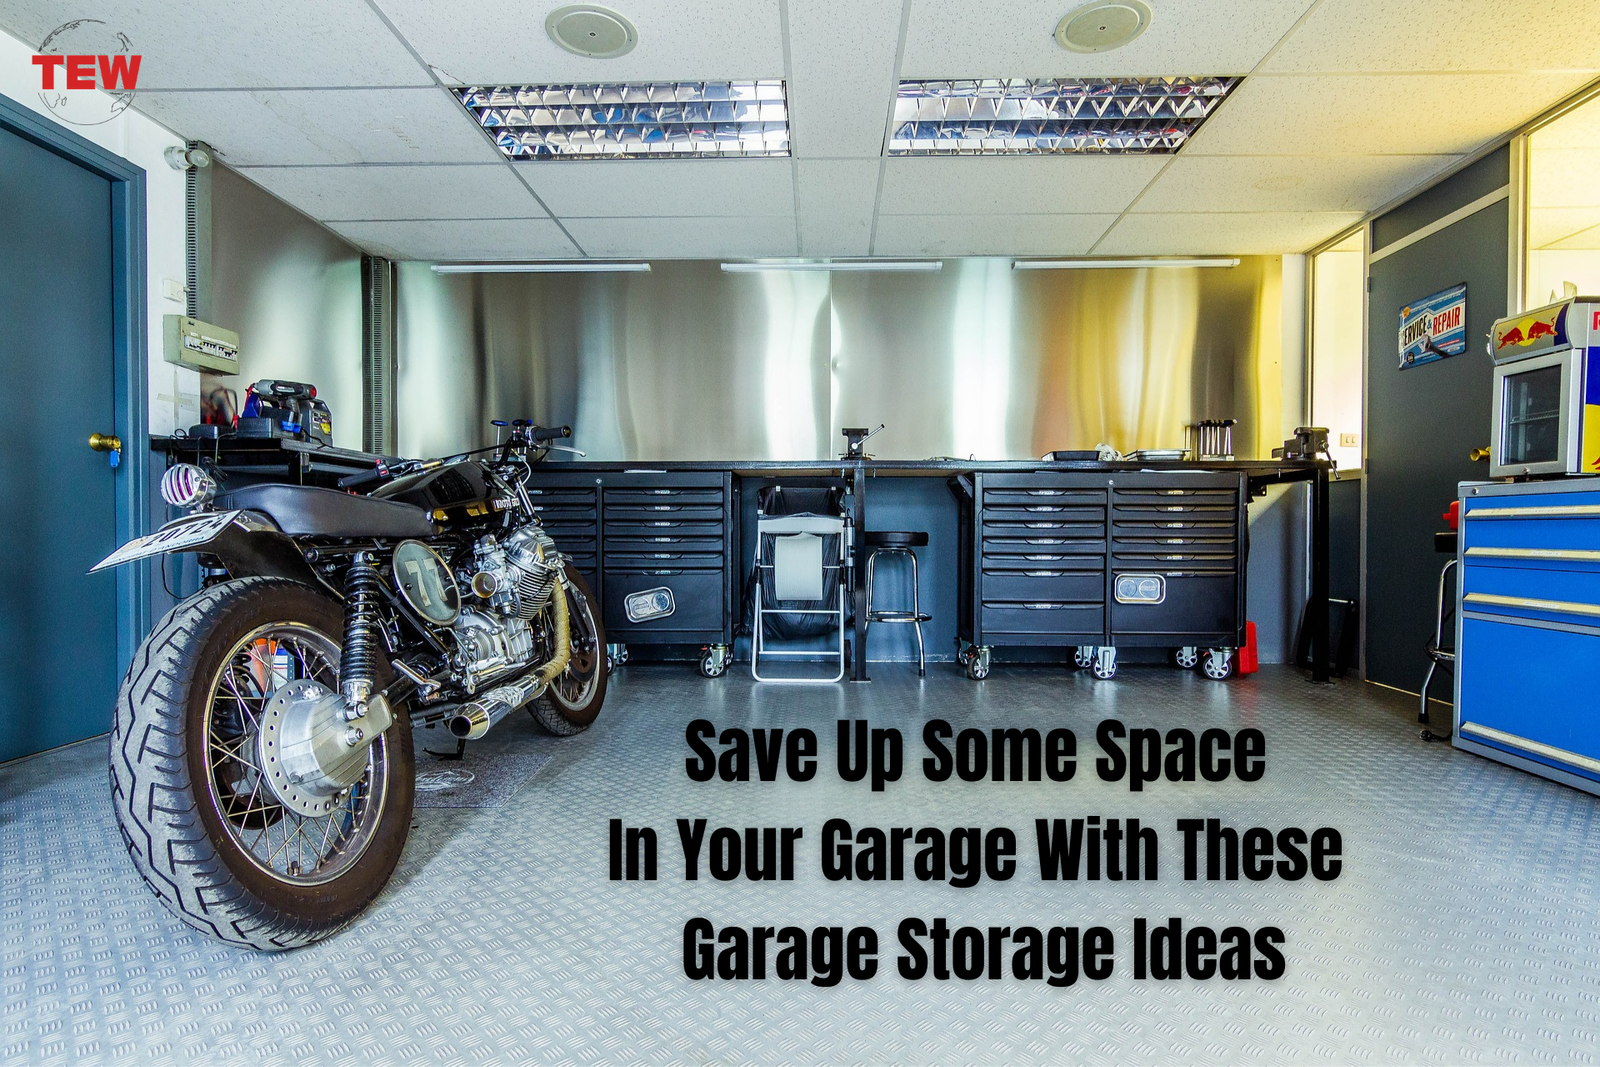 Save Up Some Space In Your Garage With These Garage Storage Ideas